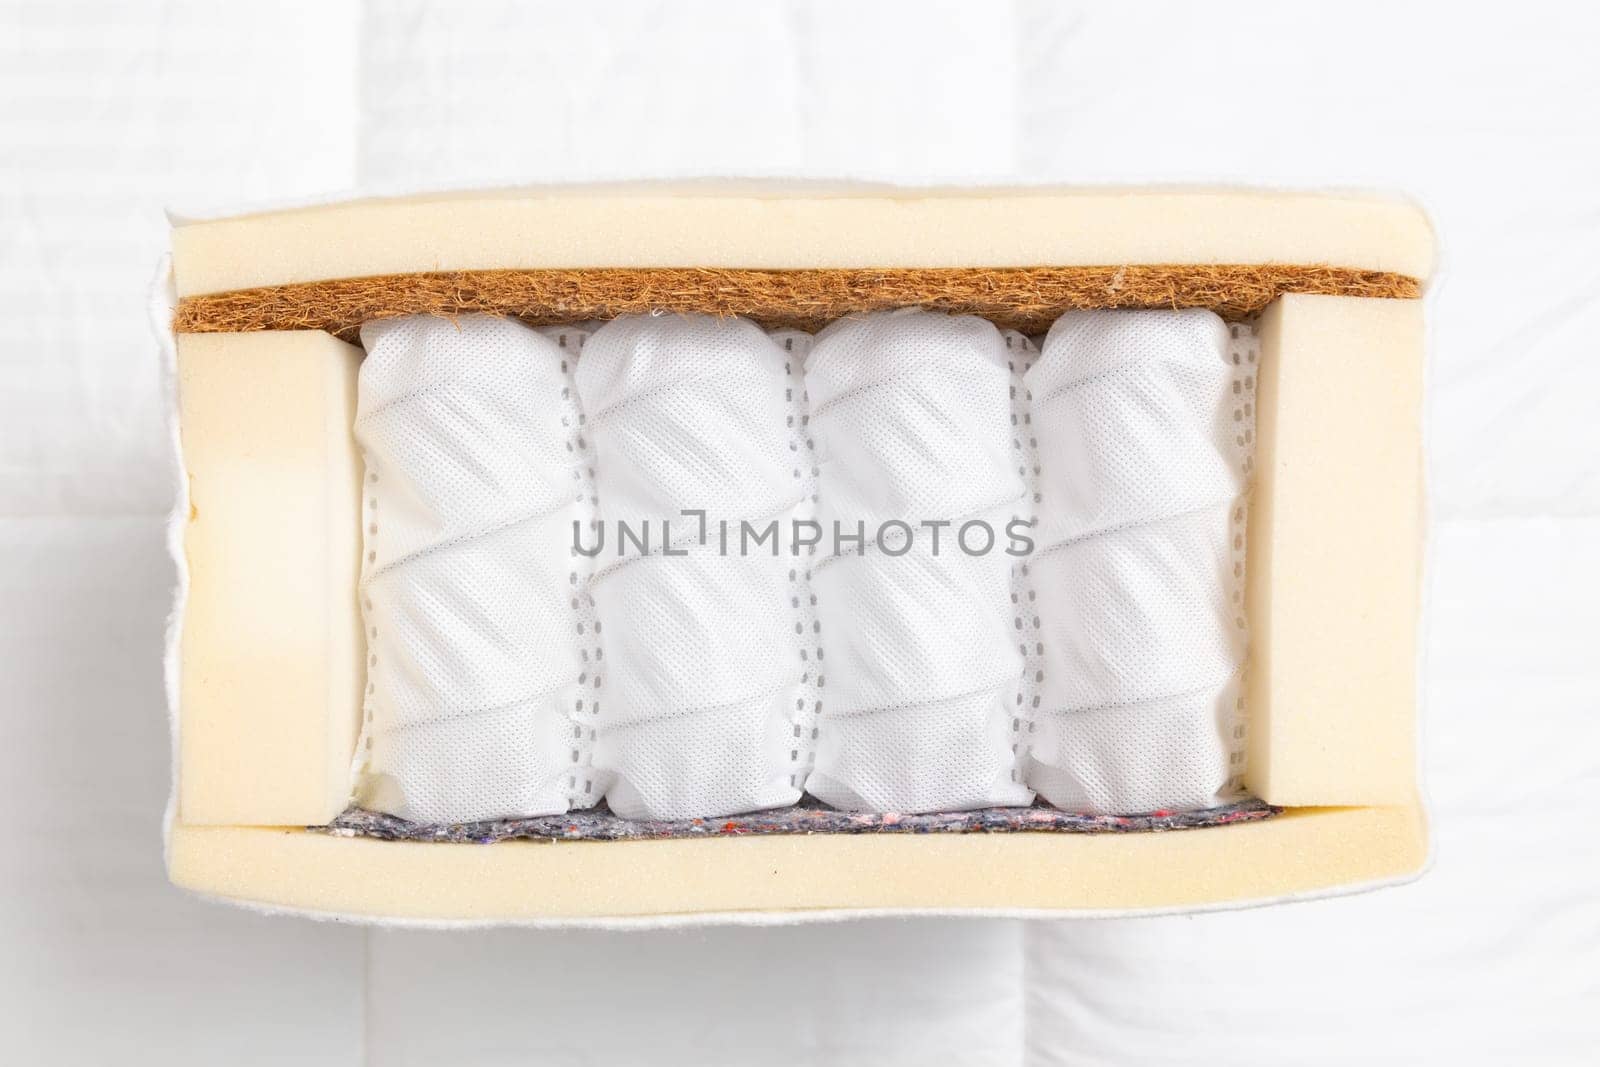 Sample of modern orthopedic mattress on textile. Mattress in section with springs on white background. Part of the mattress for familiarization with the materials.